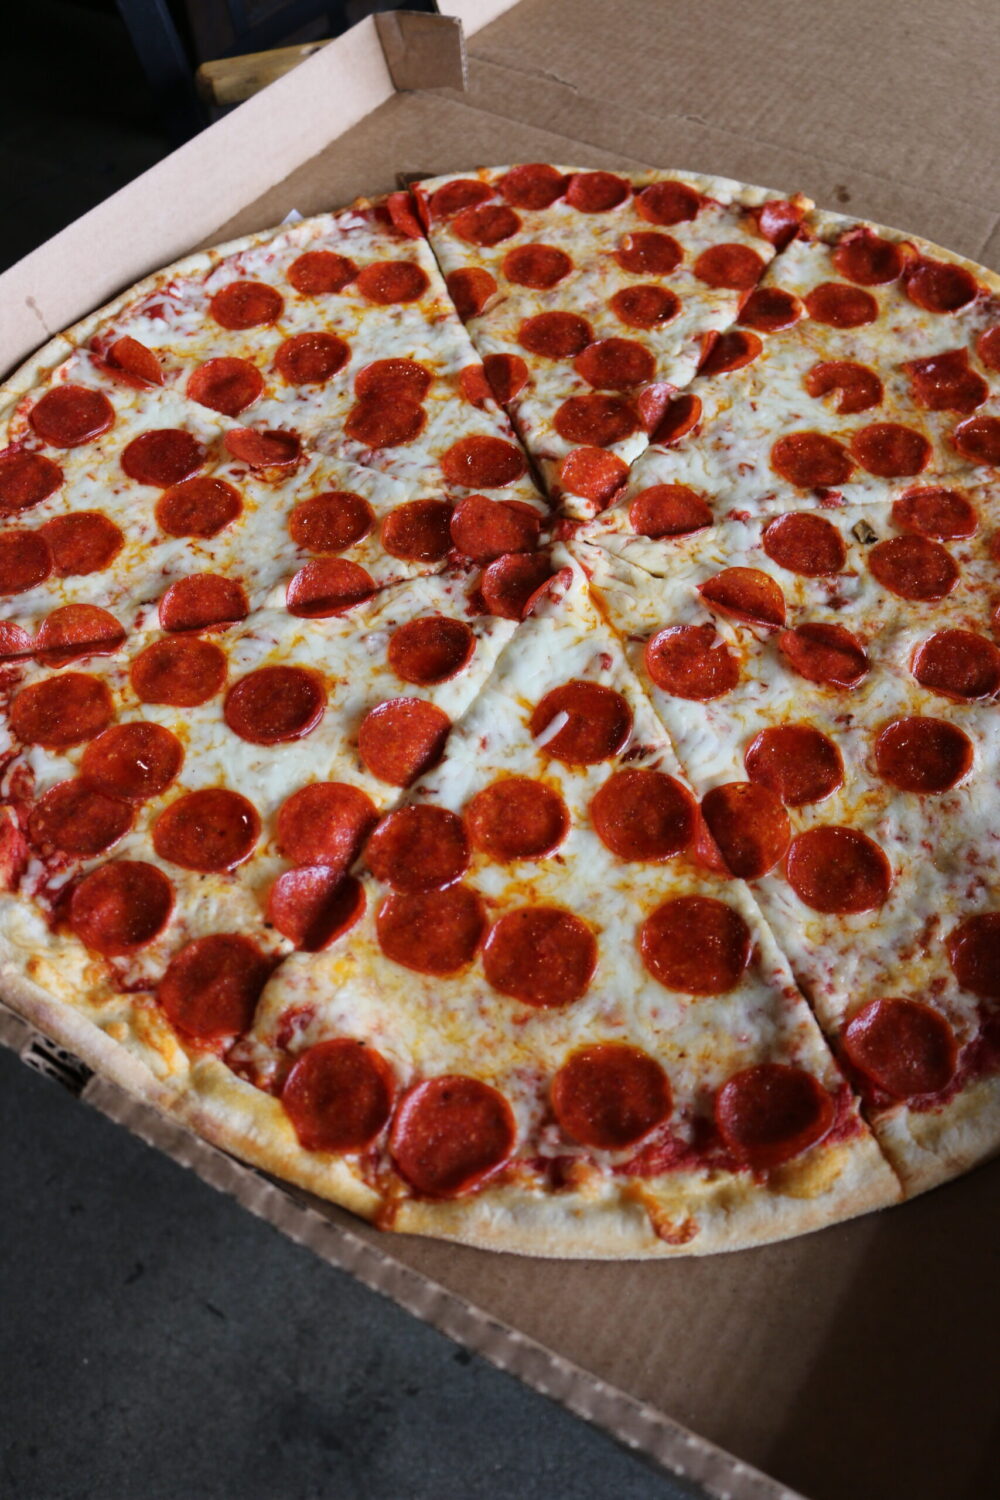 Pepperoni Pizza Slice Nutrition Facts - Eat This Much